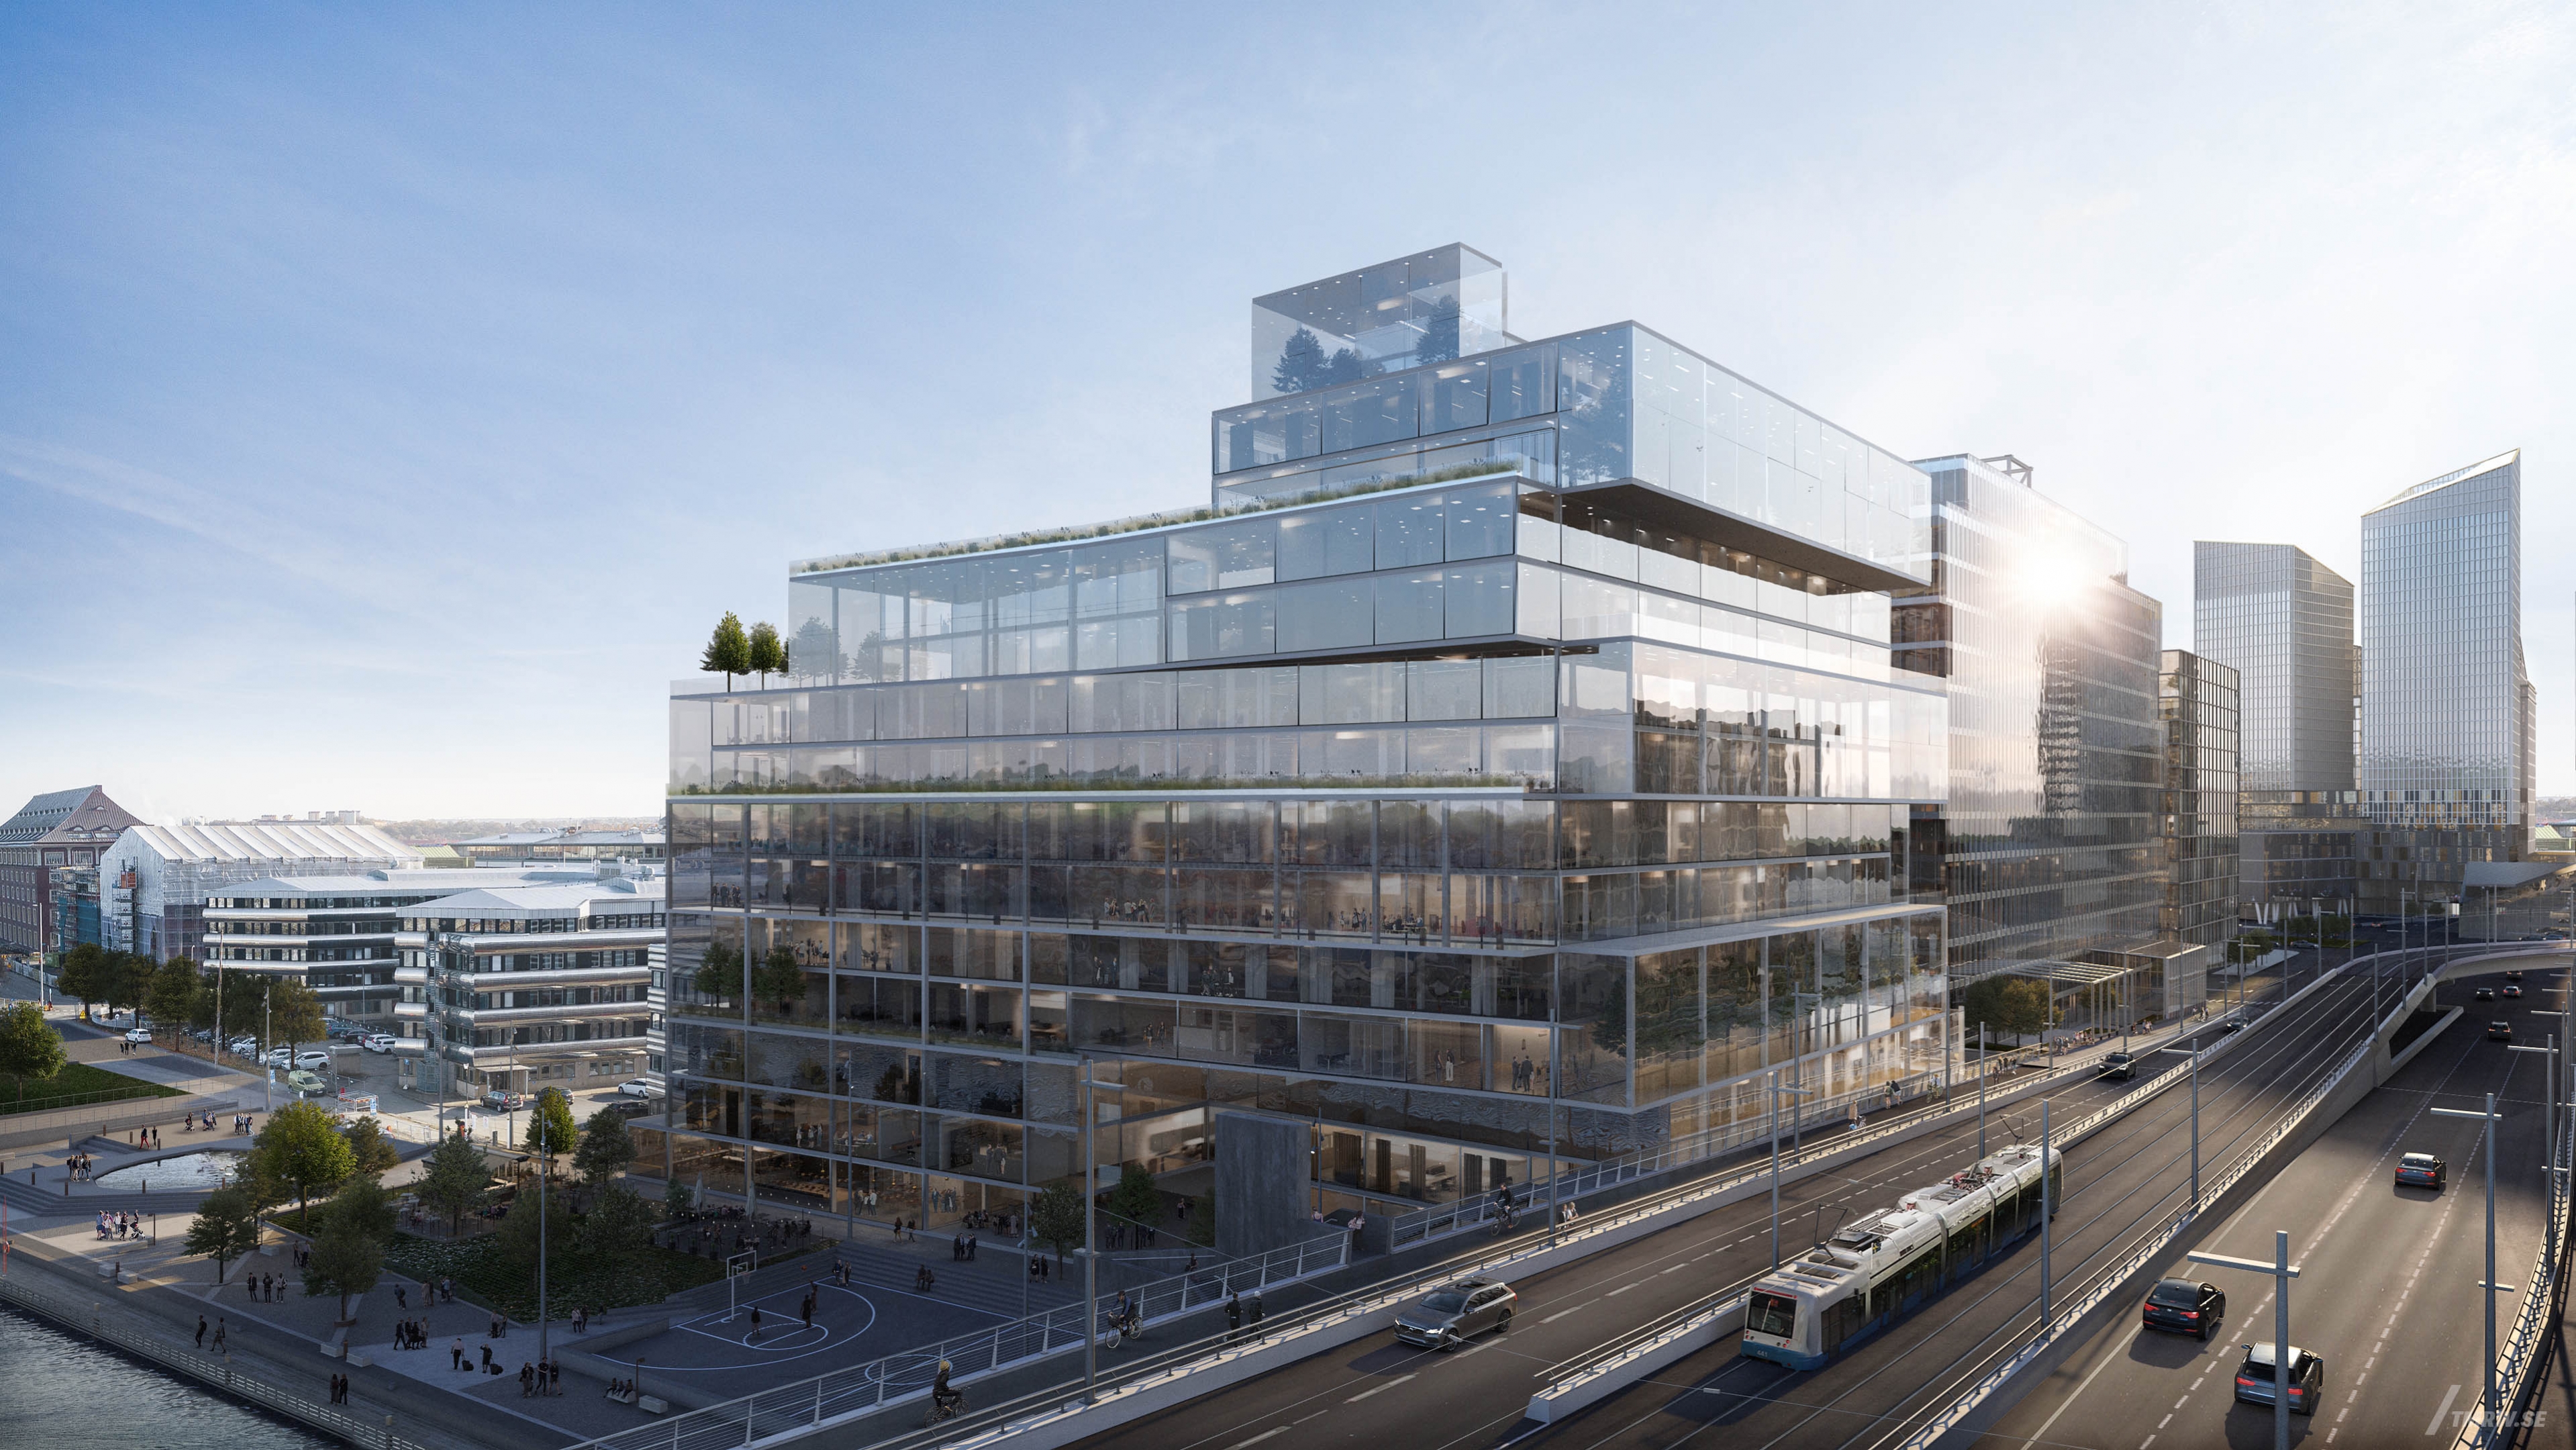 Architectural visualization of Platinan for Vasakronan a office close to a bridge in Gothenburg in day light from a semi aerial view.